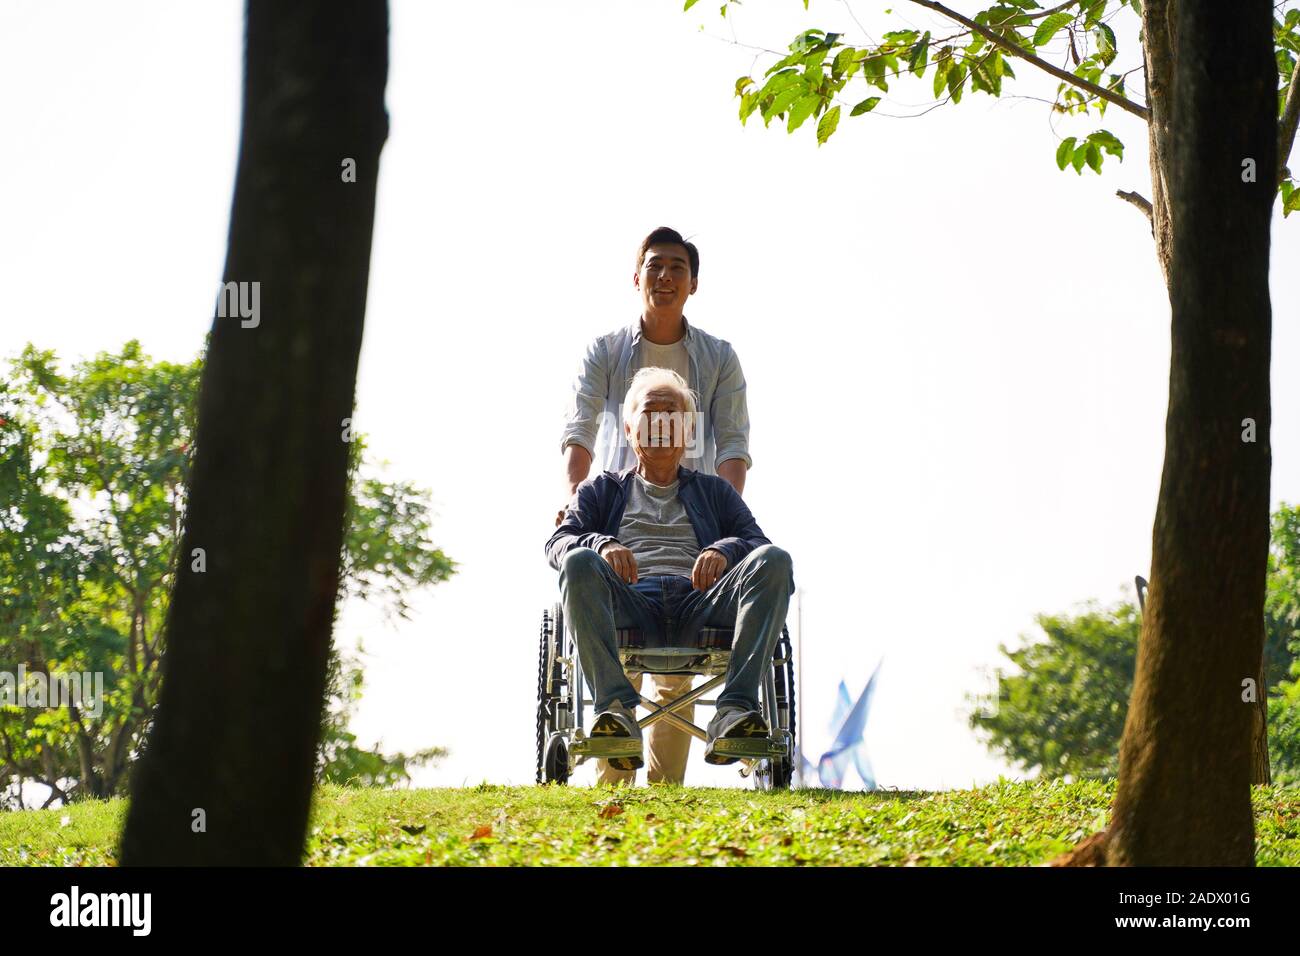 young asian adult son and wheelchair bound father enjoying nature in park Stock Photo